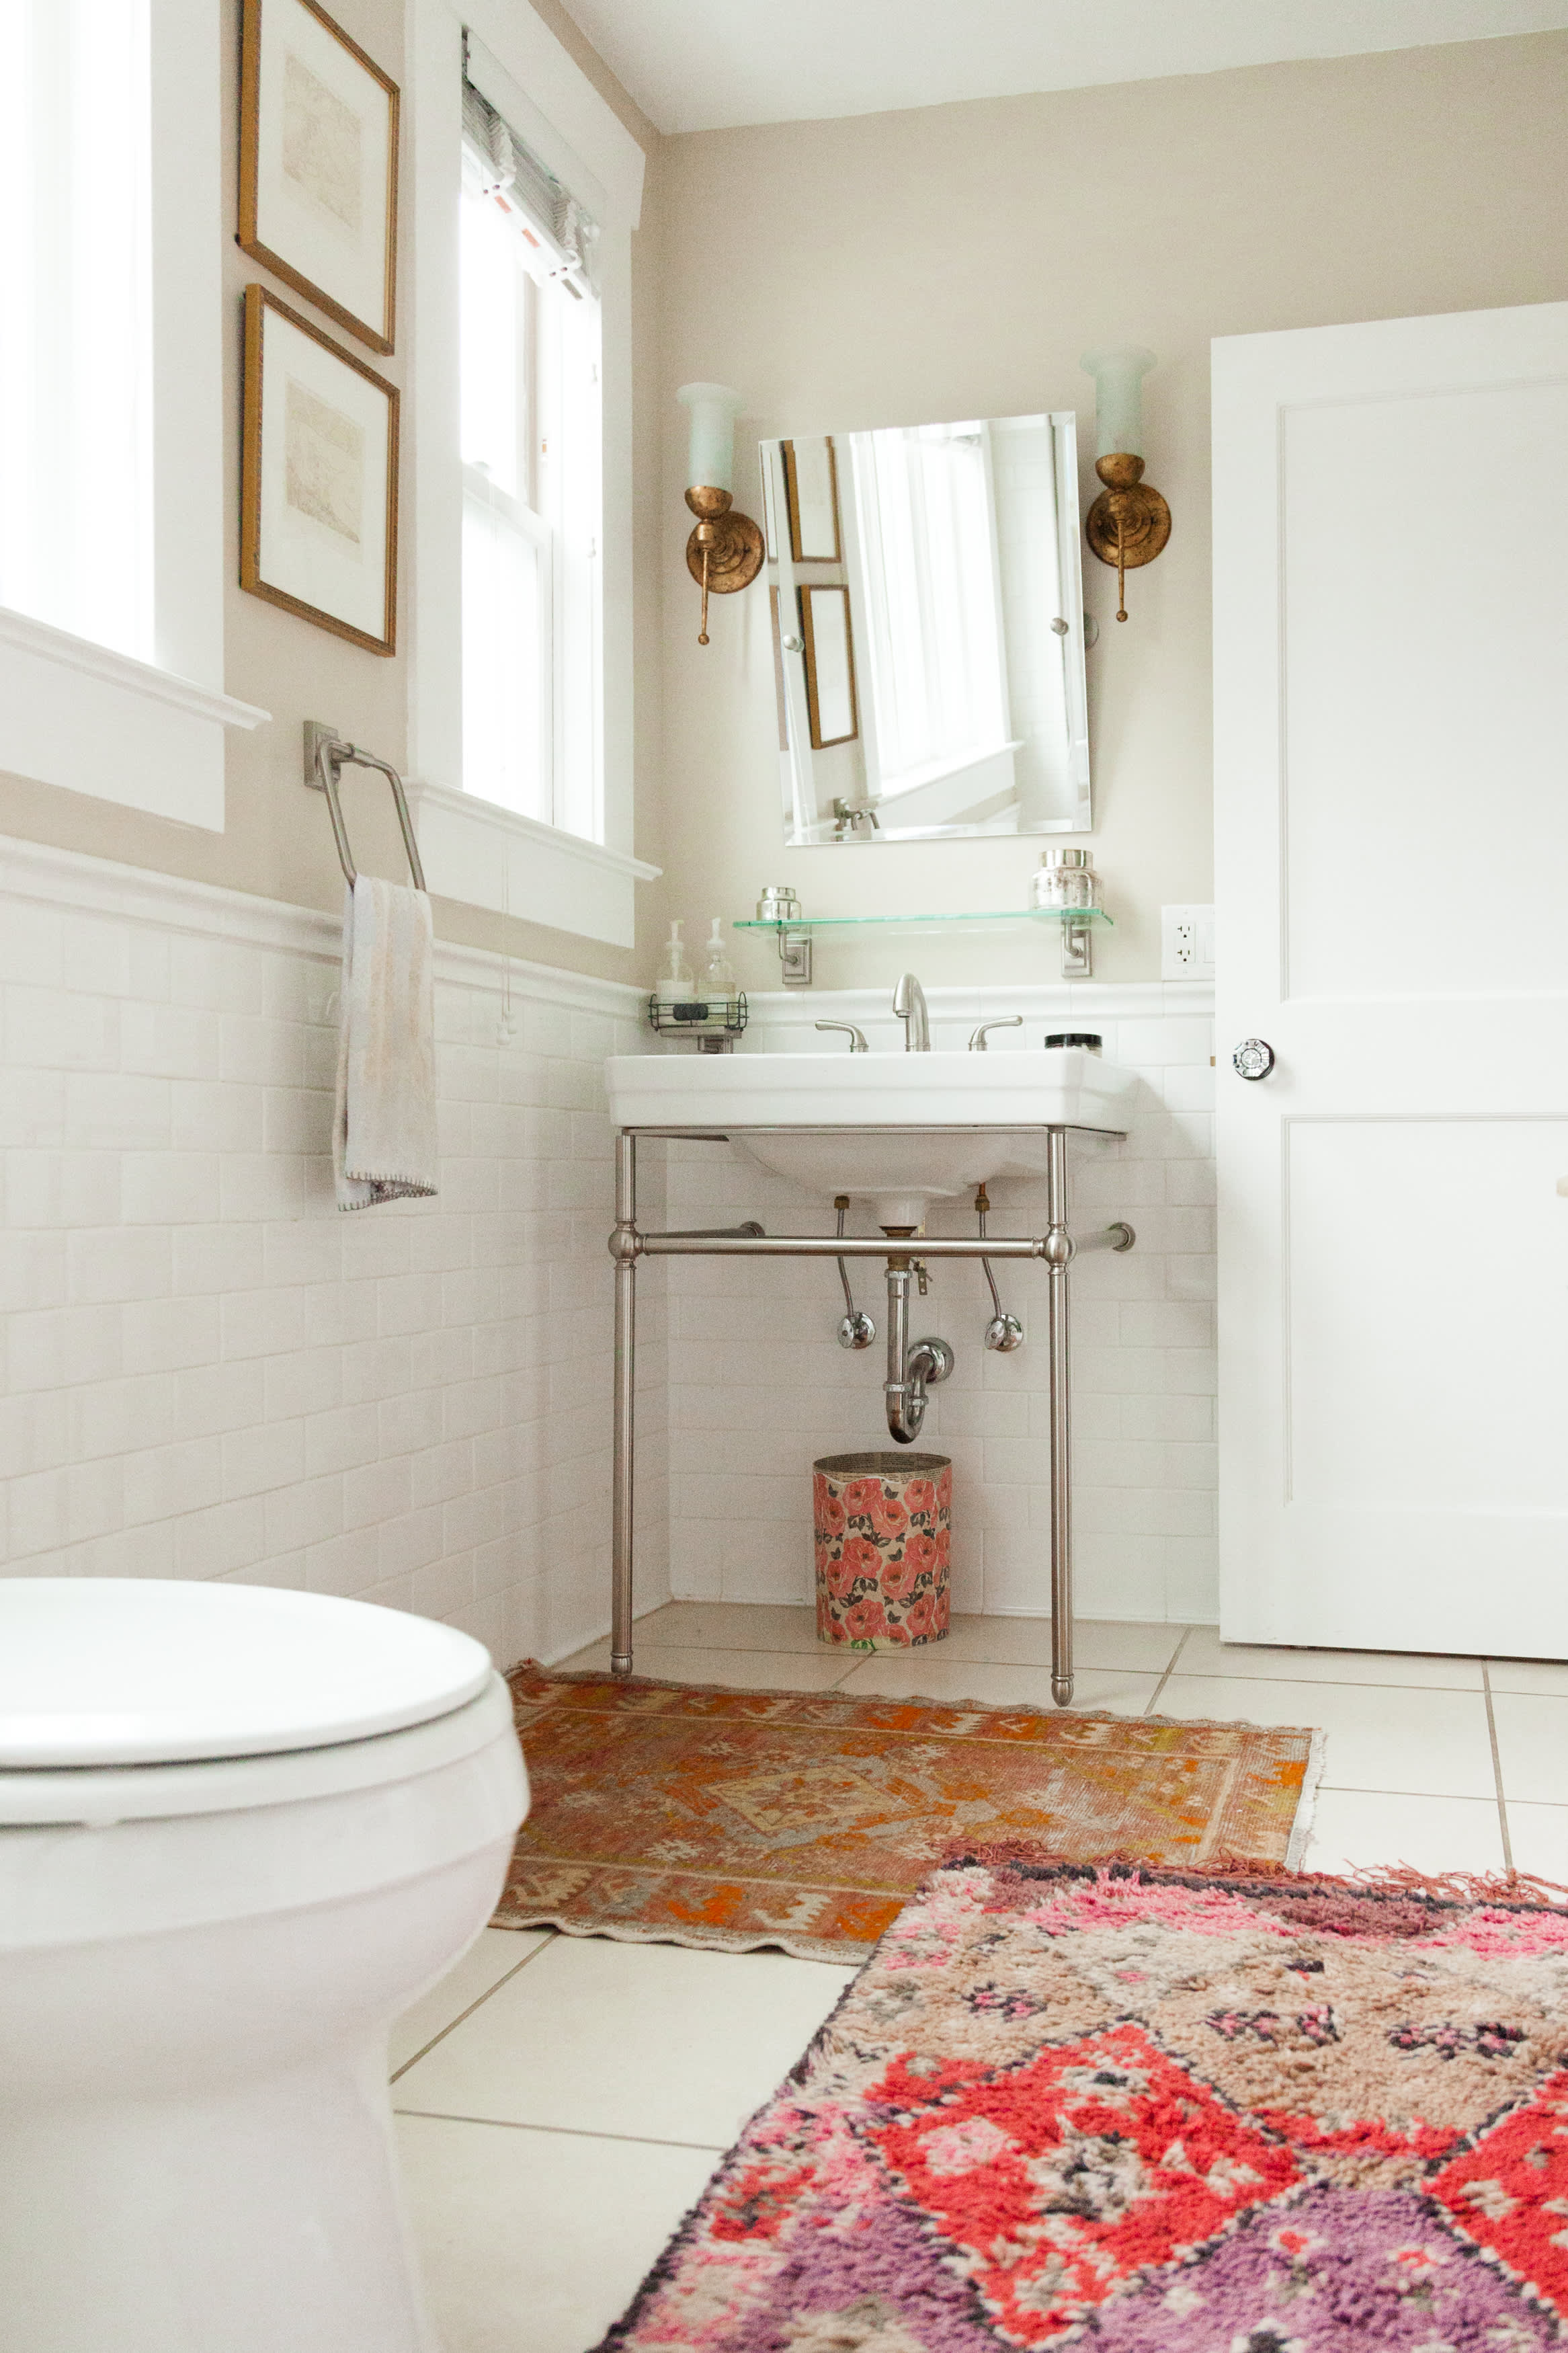 How Should You Size Your Bathroom Rug?